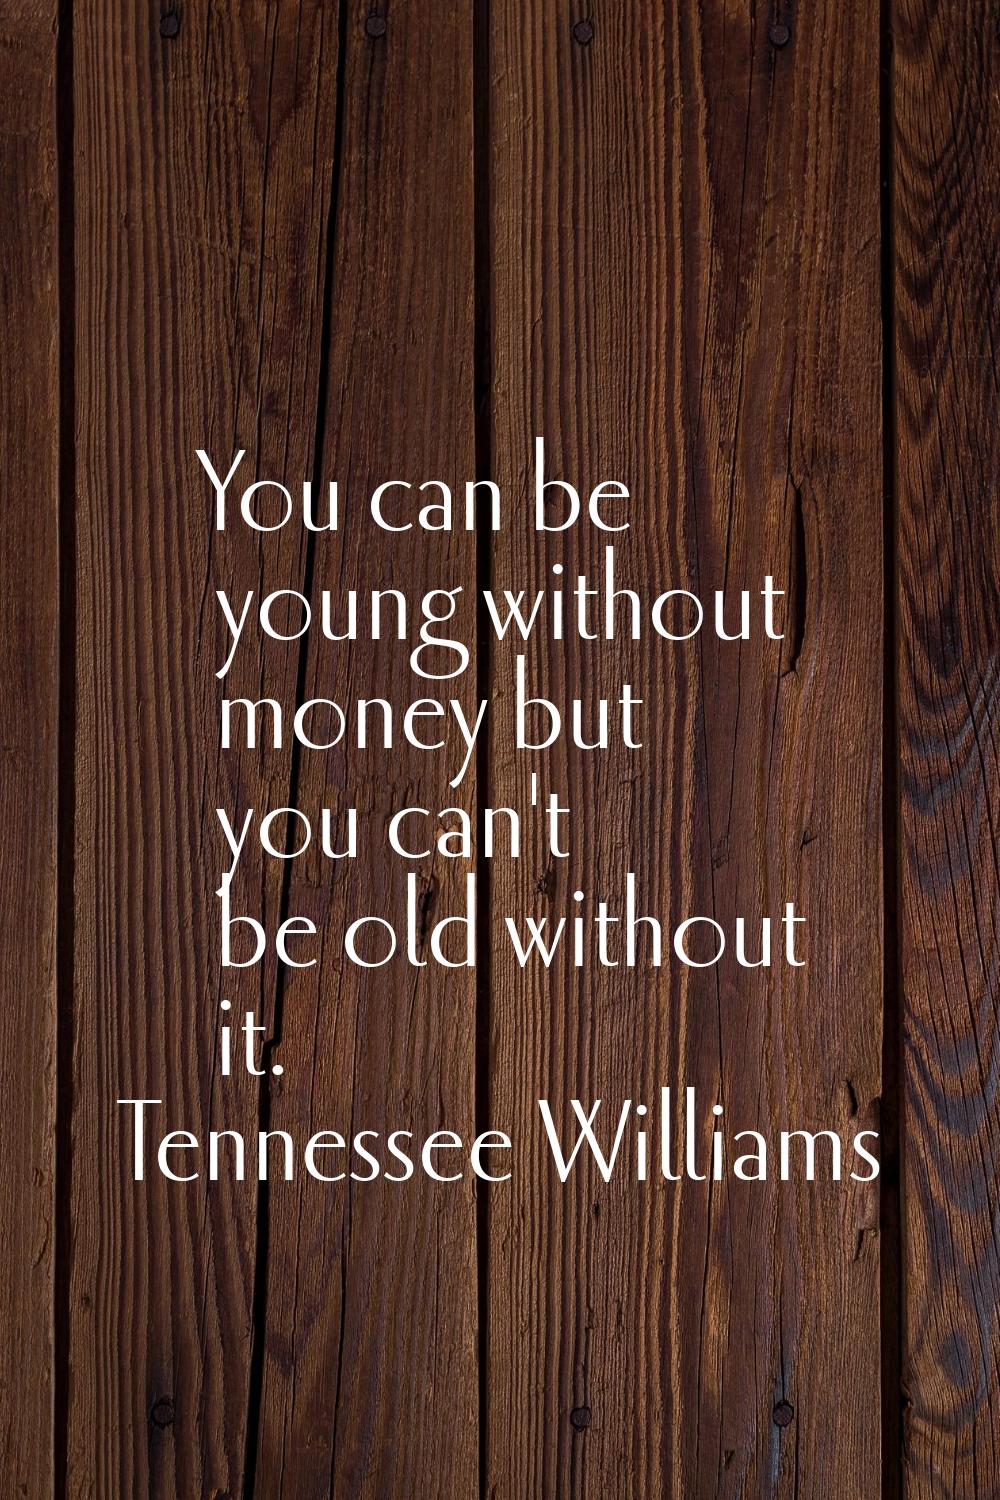 You can be young without money but you can't be old without it.